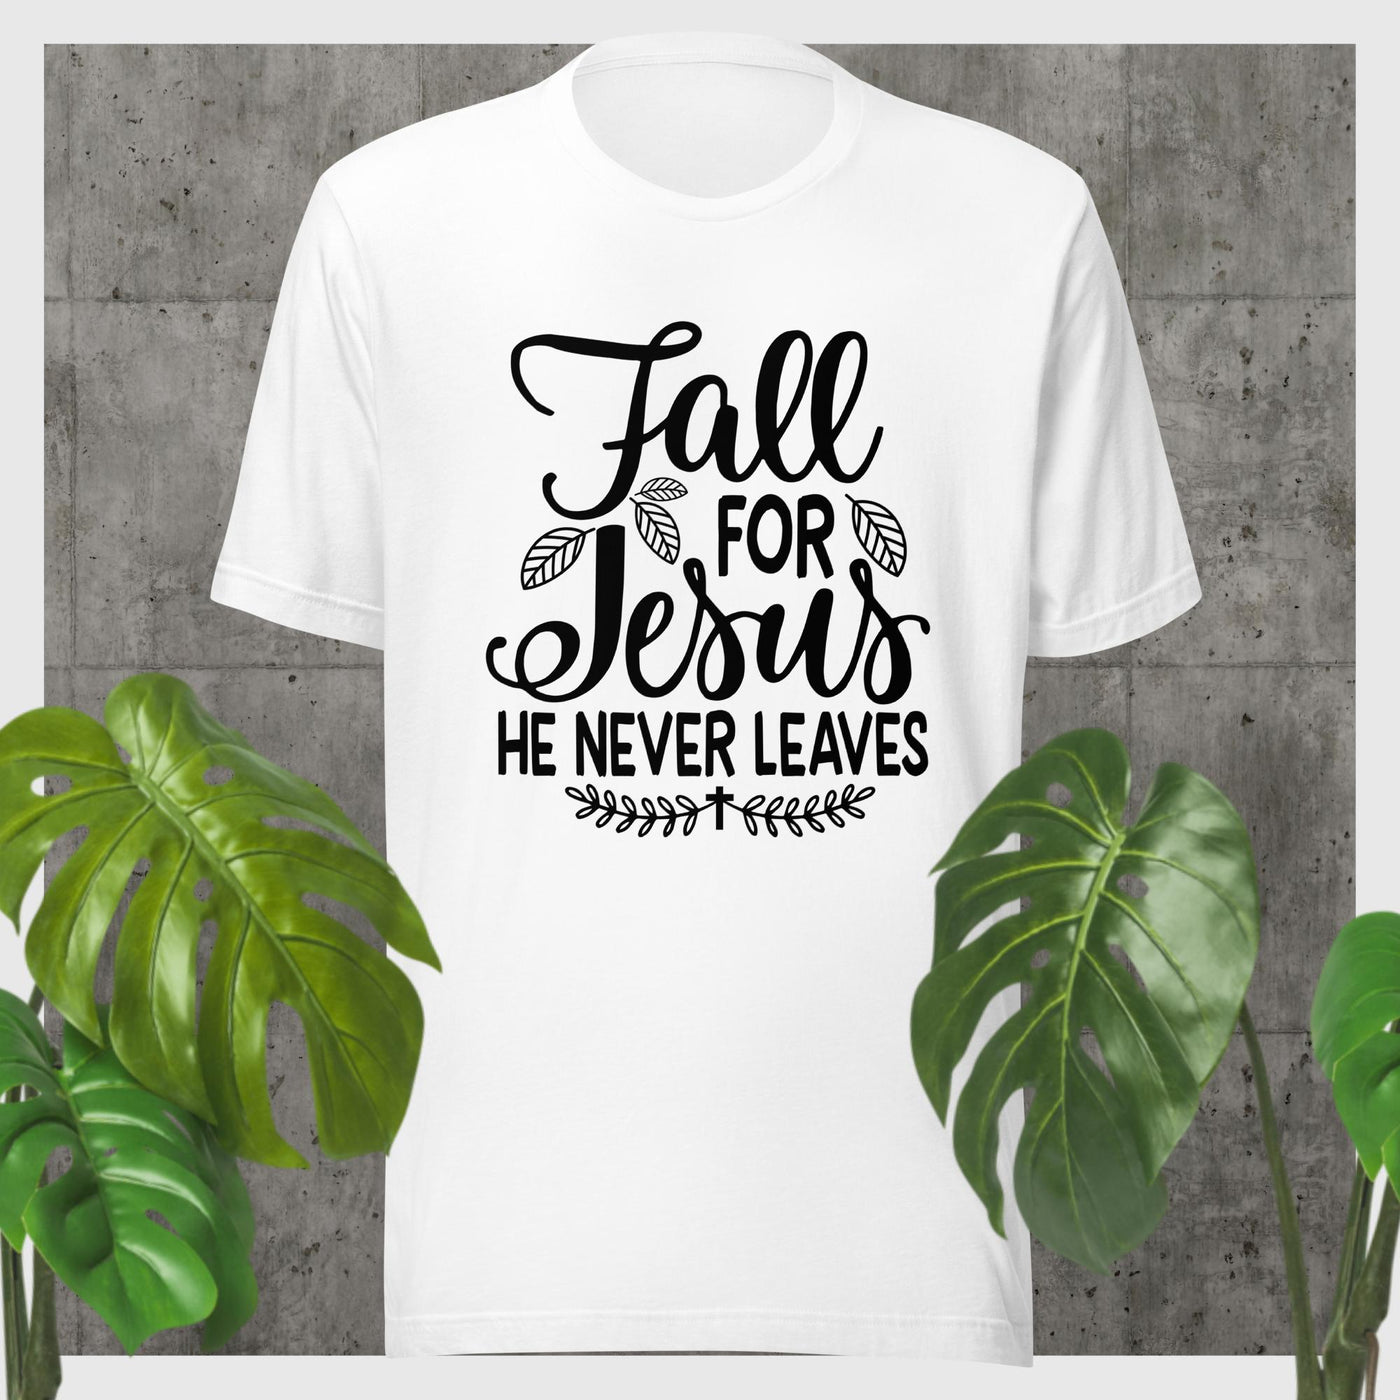 F&H Fall For Jesus He Never Leaves T-shirt